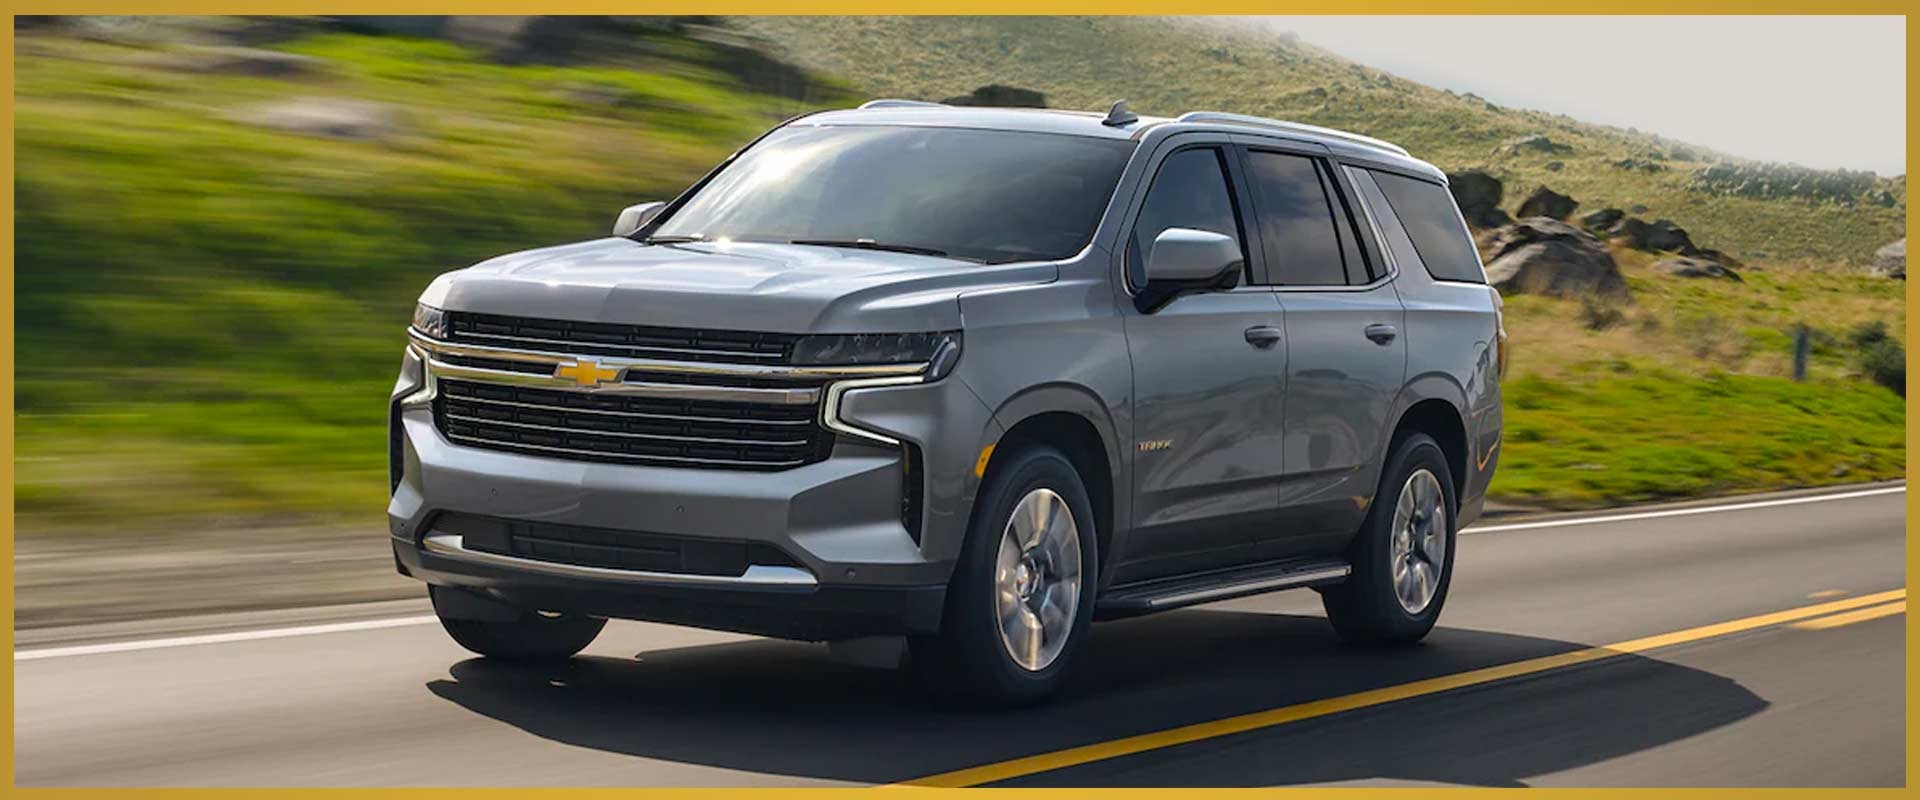 Custom Order Your Own Chevy Tahoe | Design Yours Today